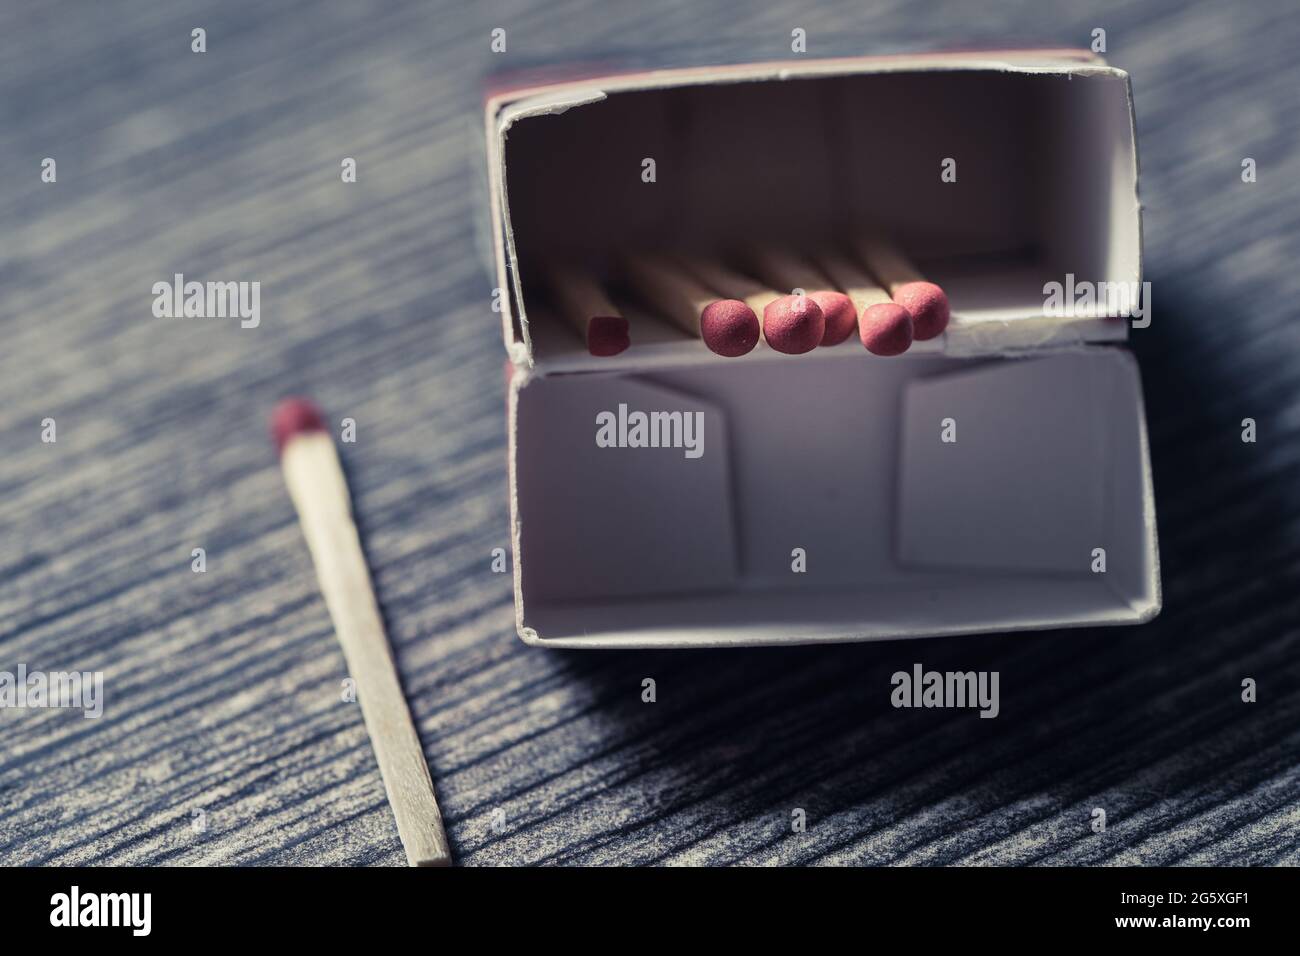 High angle view of matches in a matchbox lying on a wooden table Stock Photo